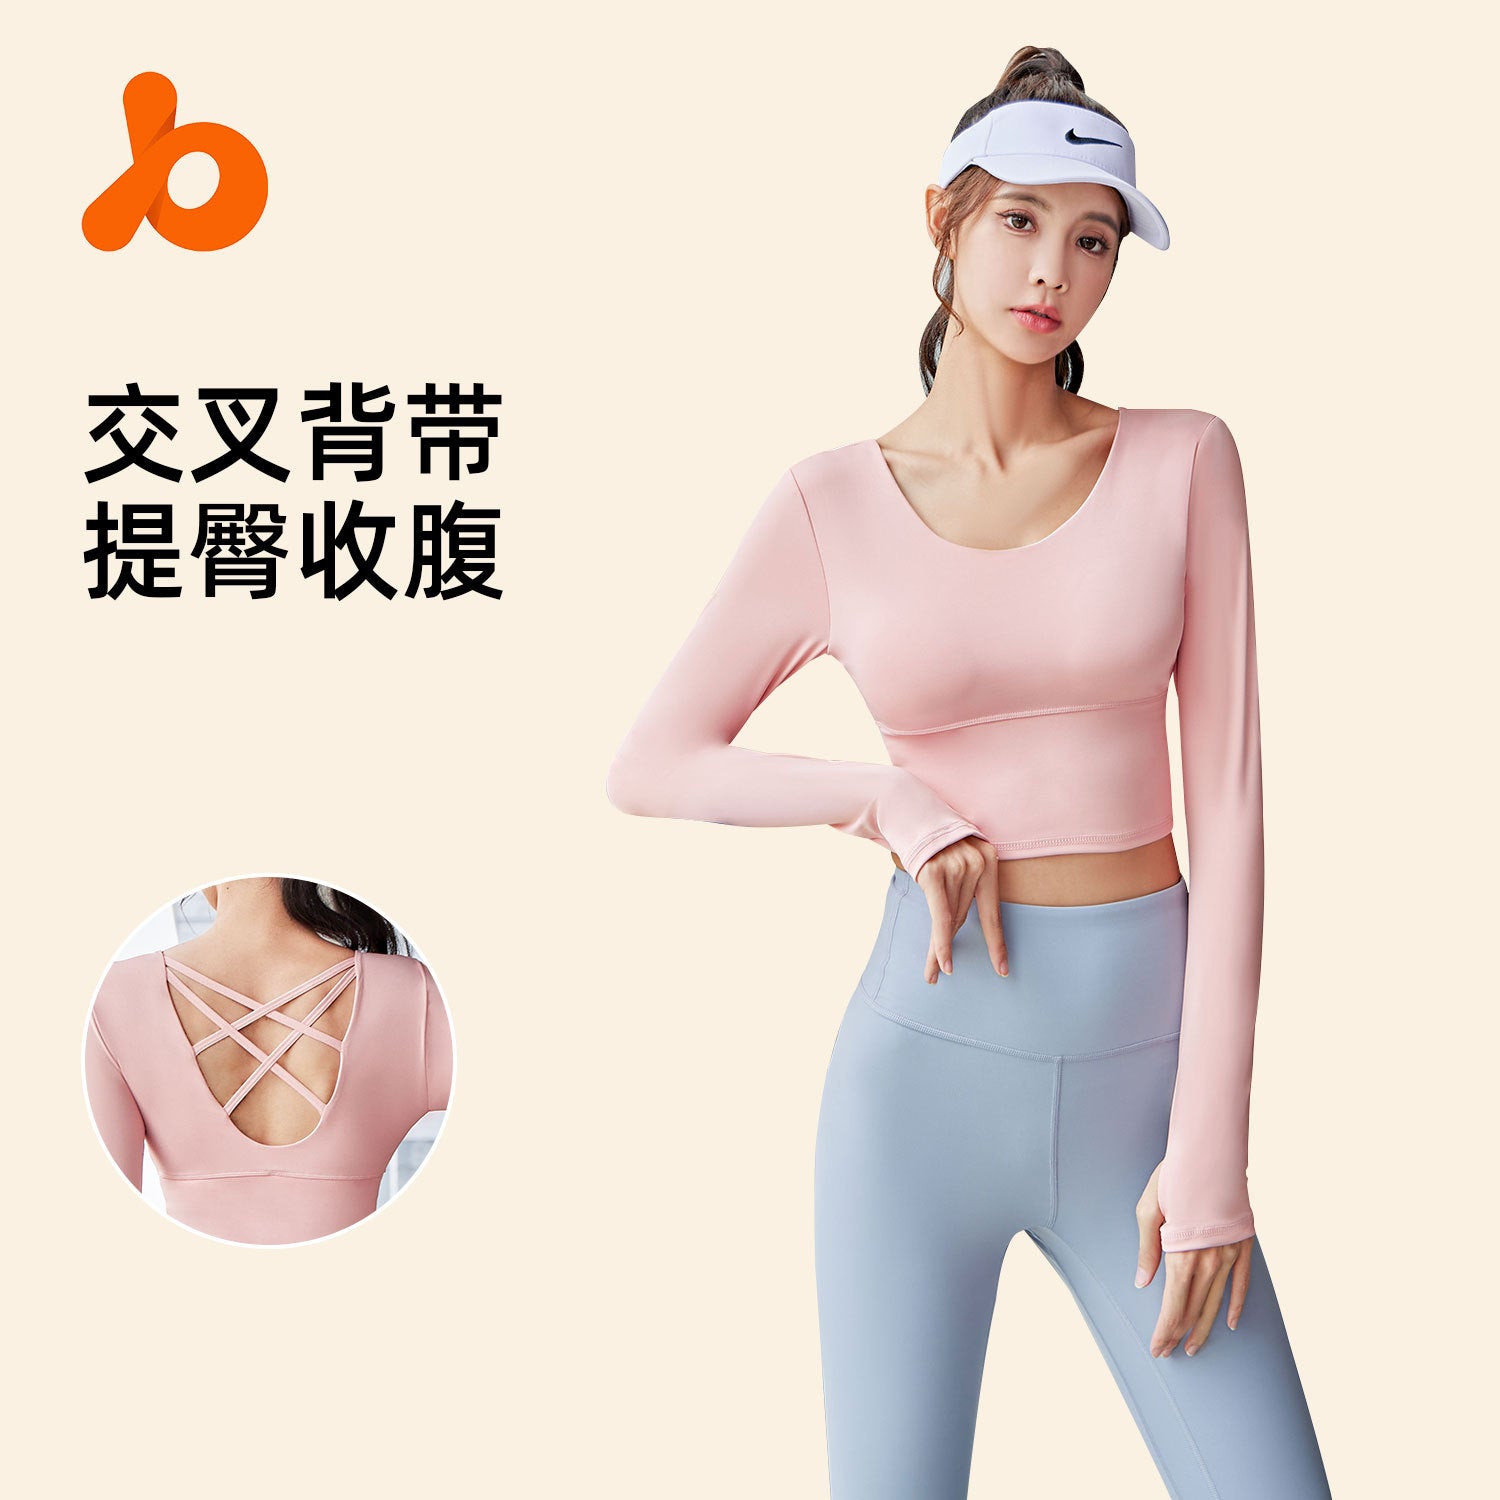 Juyitang Peach Yoga Beauty Back Suit No Bra Yoga Suit High Waist Hip Nude Fitness Suit